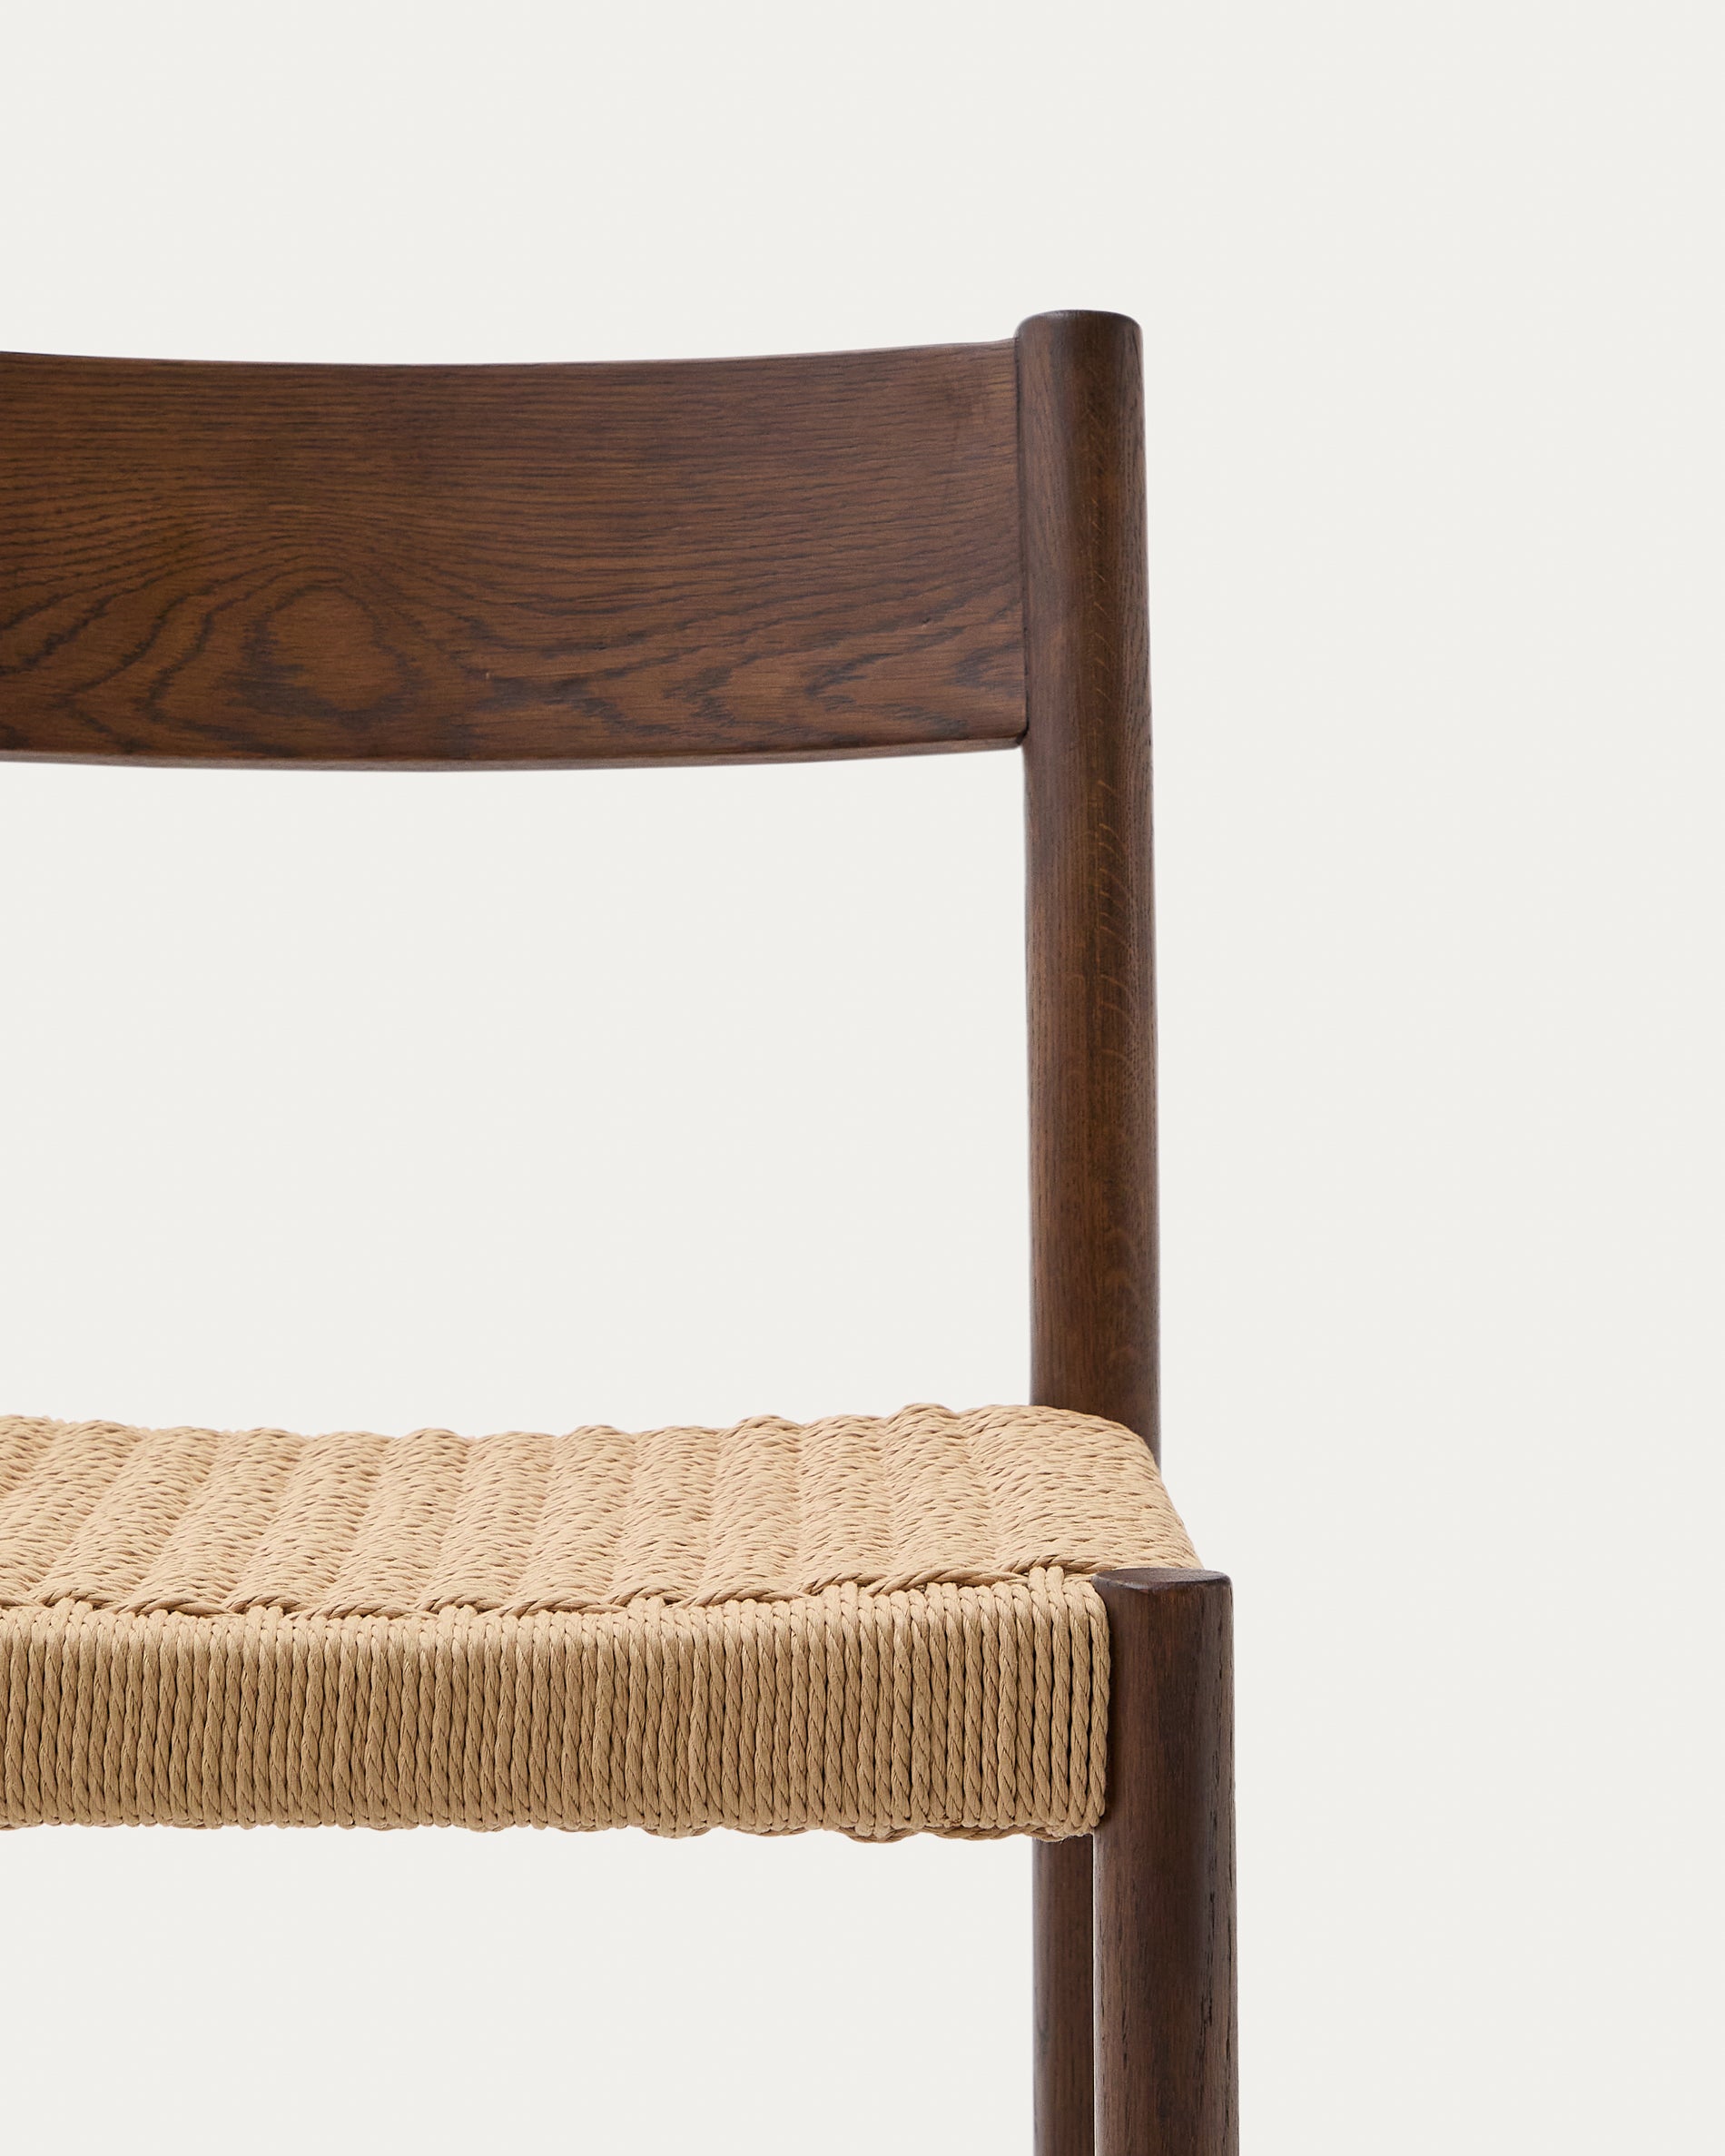 Yalia chair with back, solid oak with walnut finish and rope seat, 65 cm 100% FSC